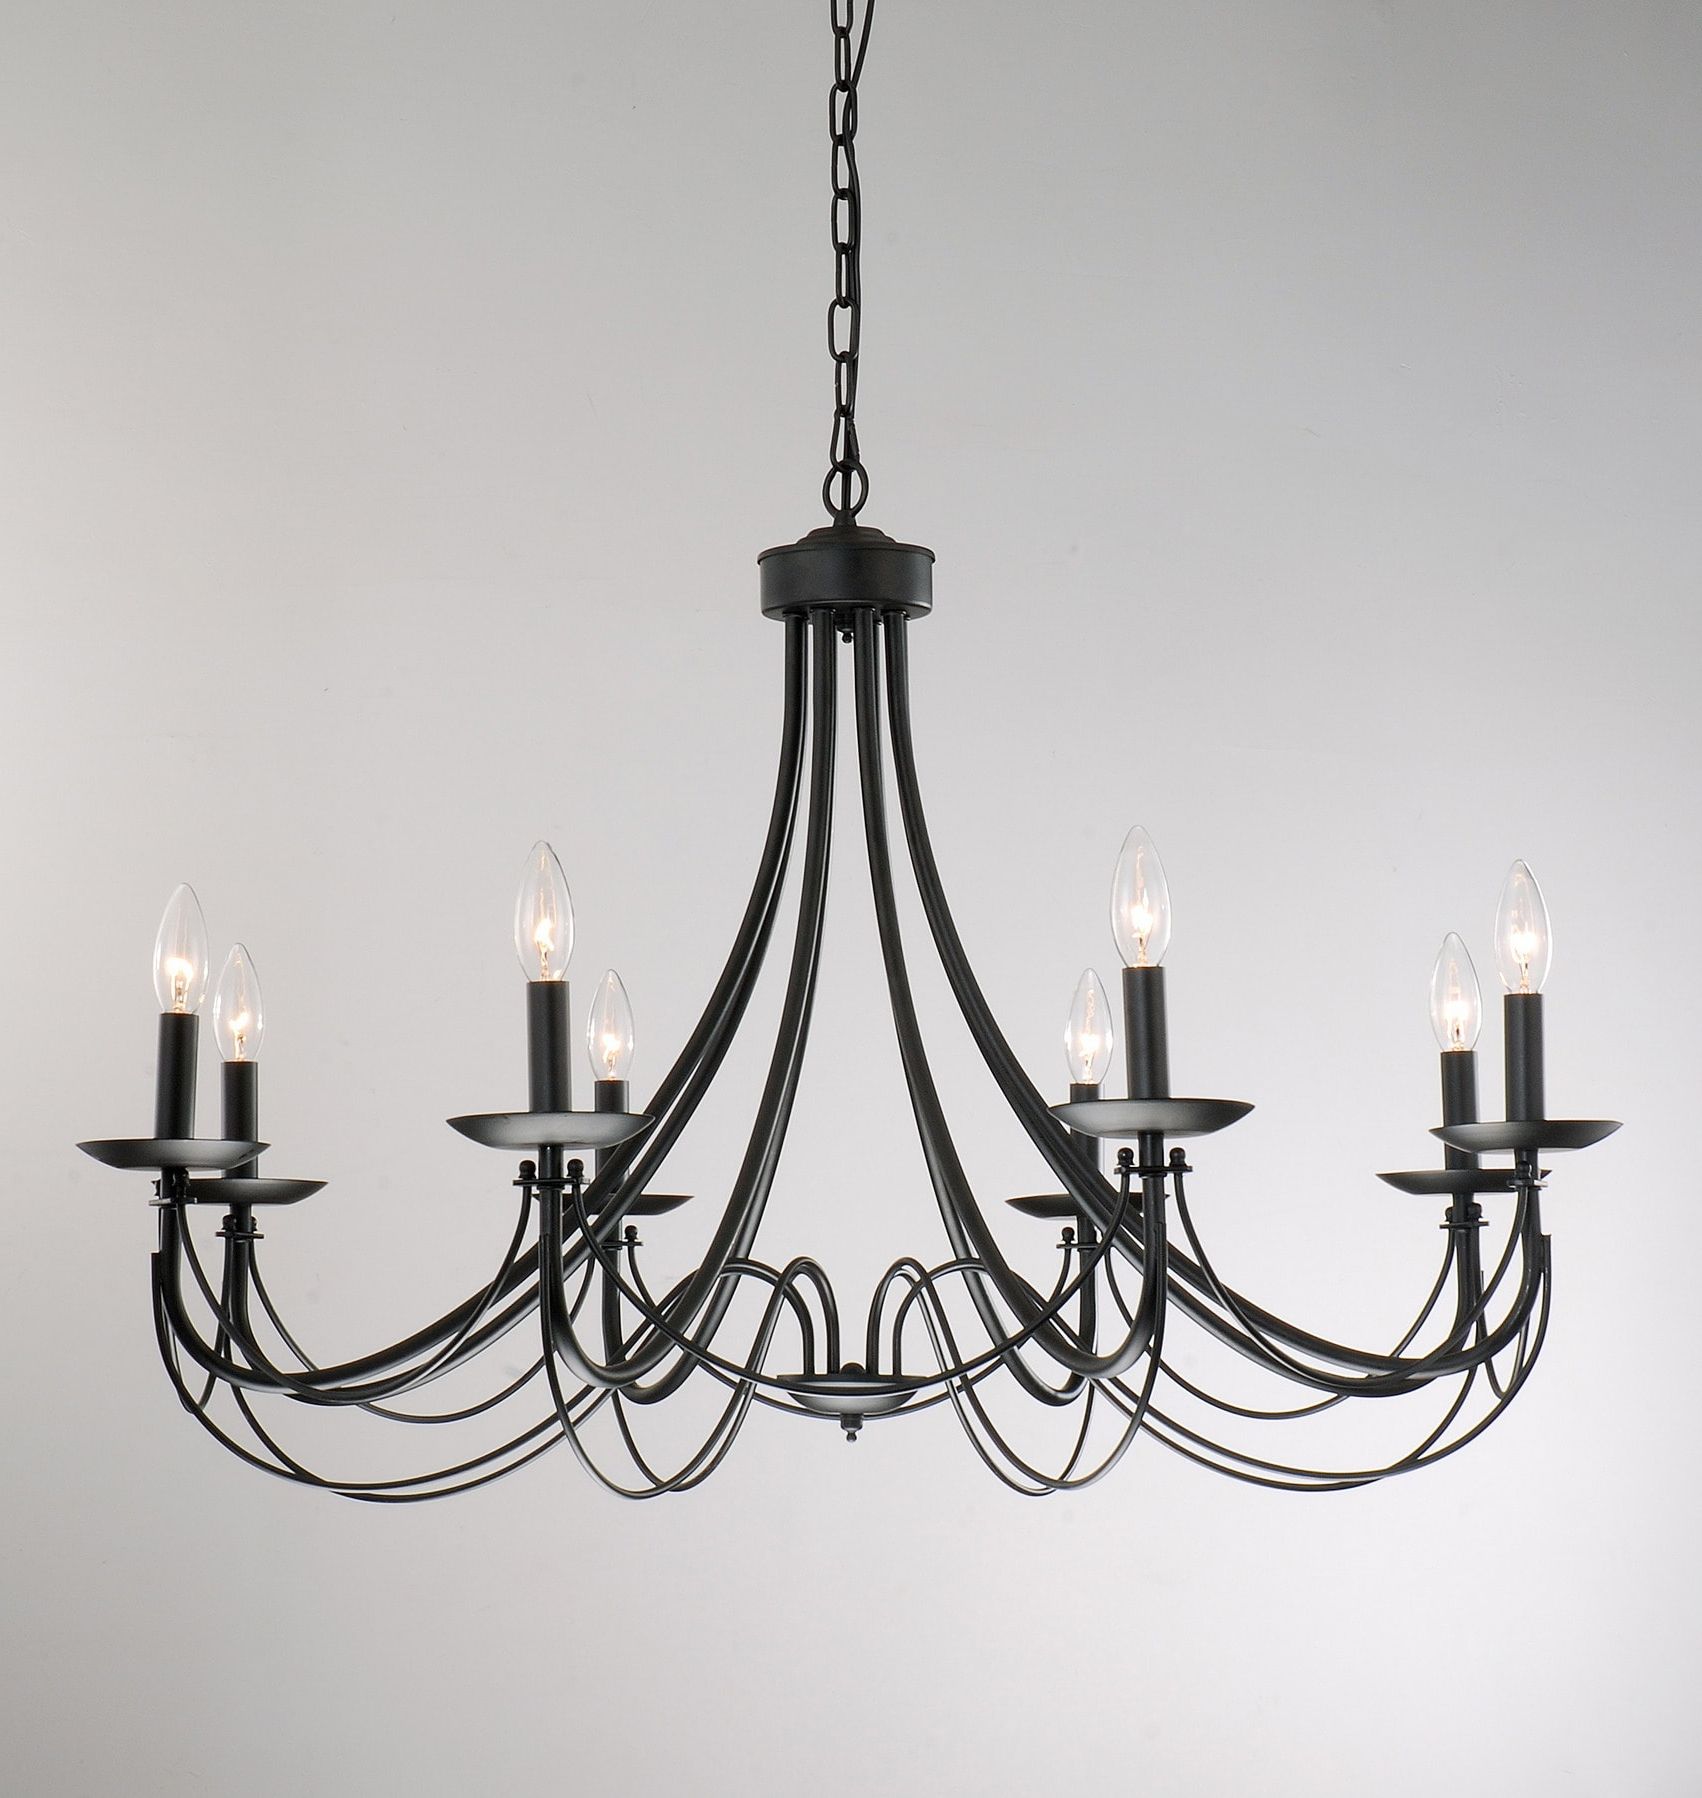 Rustic Black 28 Inch Four Light Chandeliers Throughout Favorite Iron 8 Light Black Chandelier – Free Shipping Today (View 5 of 15)